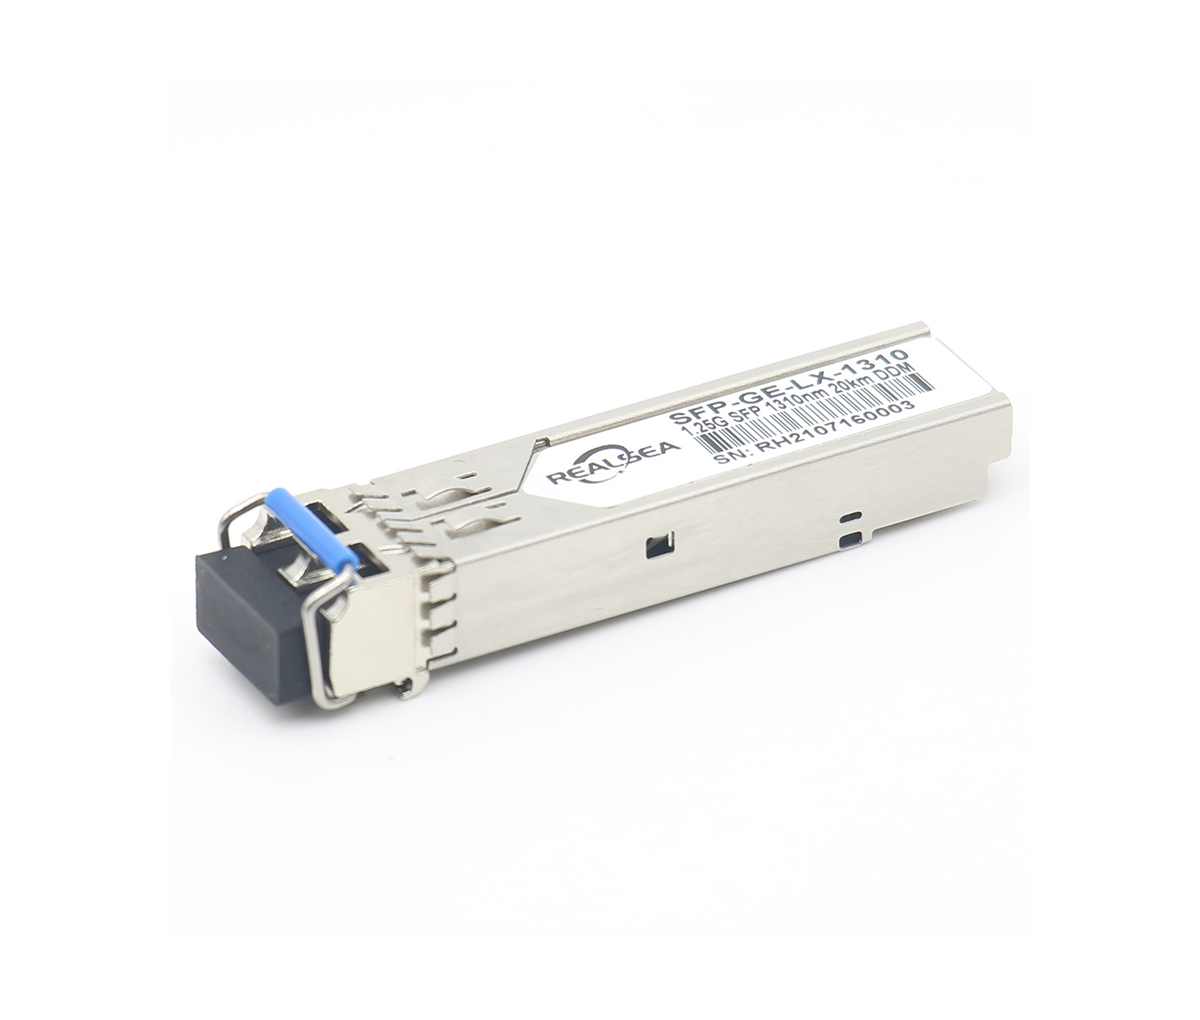 What are the main aspects of purchasing optical module products?Juniper compatible SFP optical transceiver